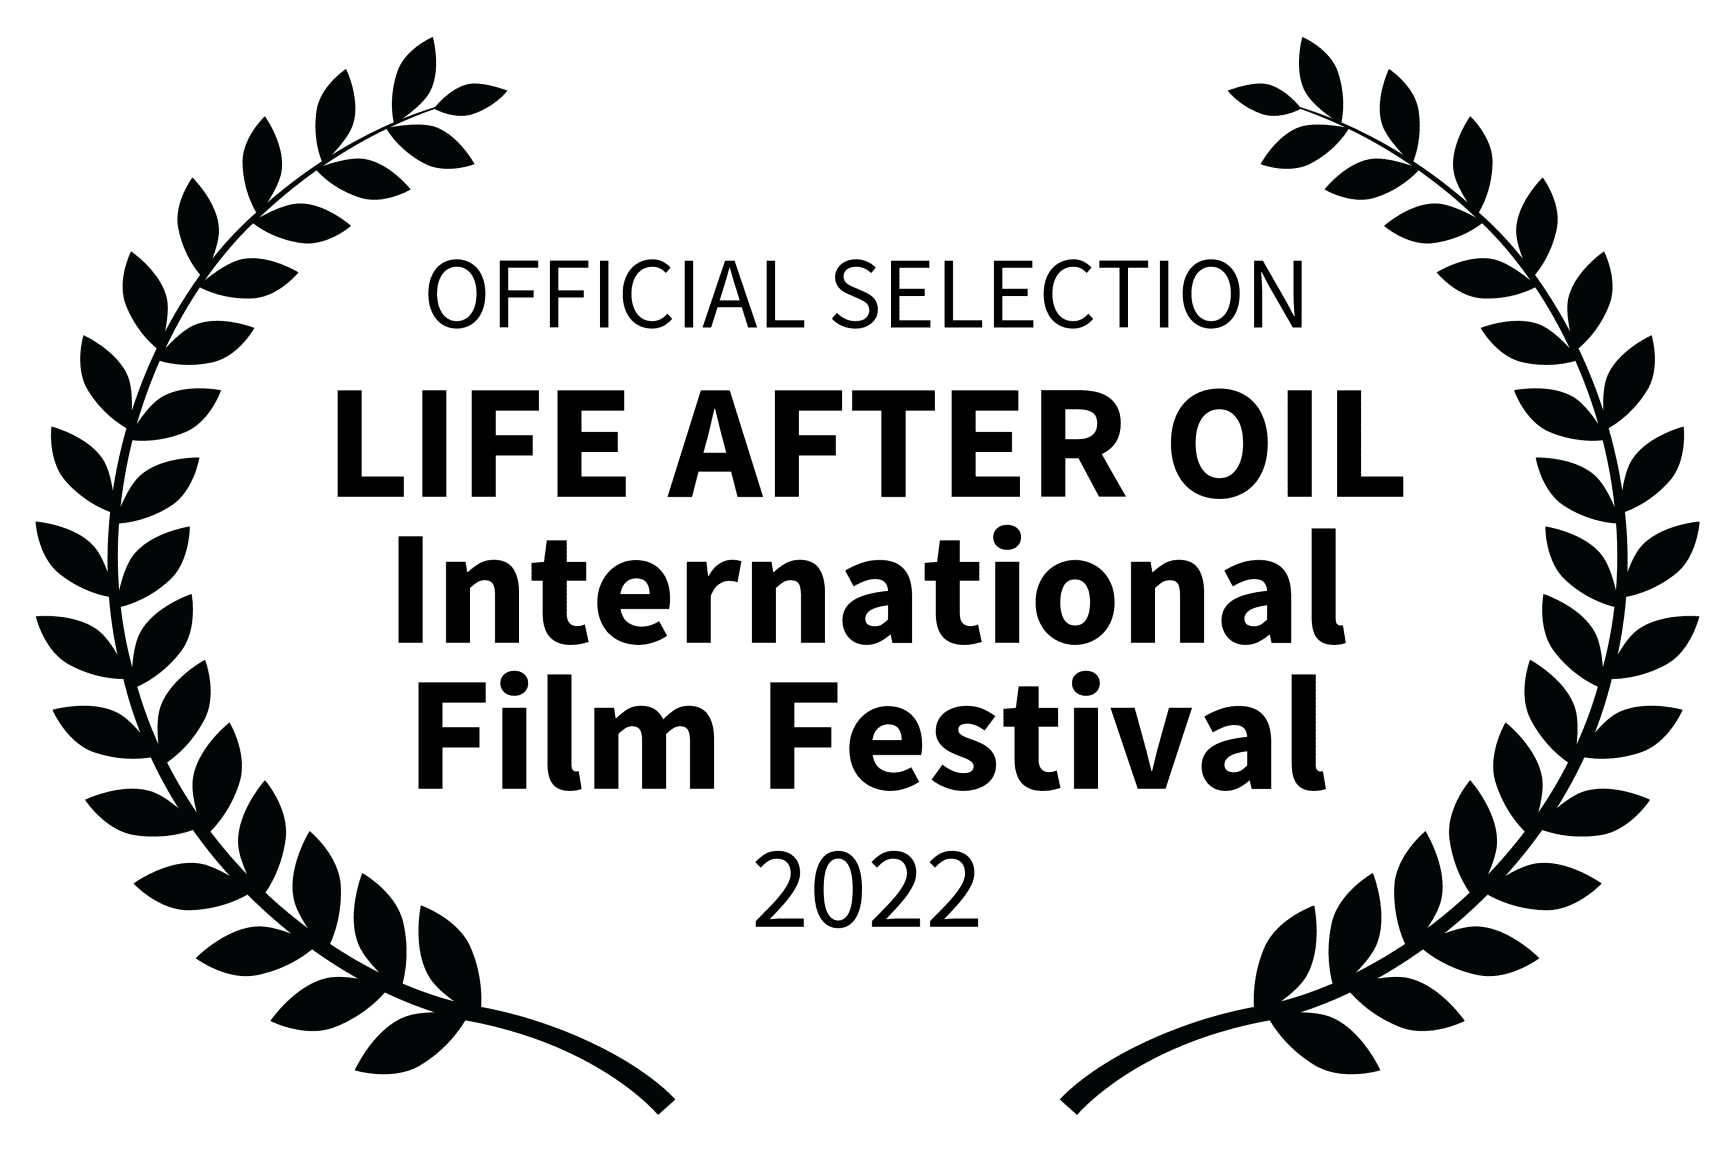 OFFICIAL SELECTION - LIFE AFTER OIL International Film Festival - 2022